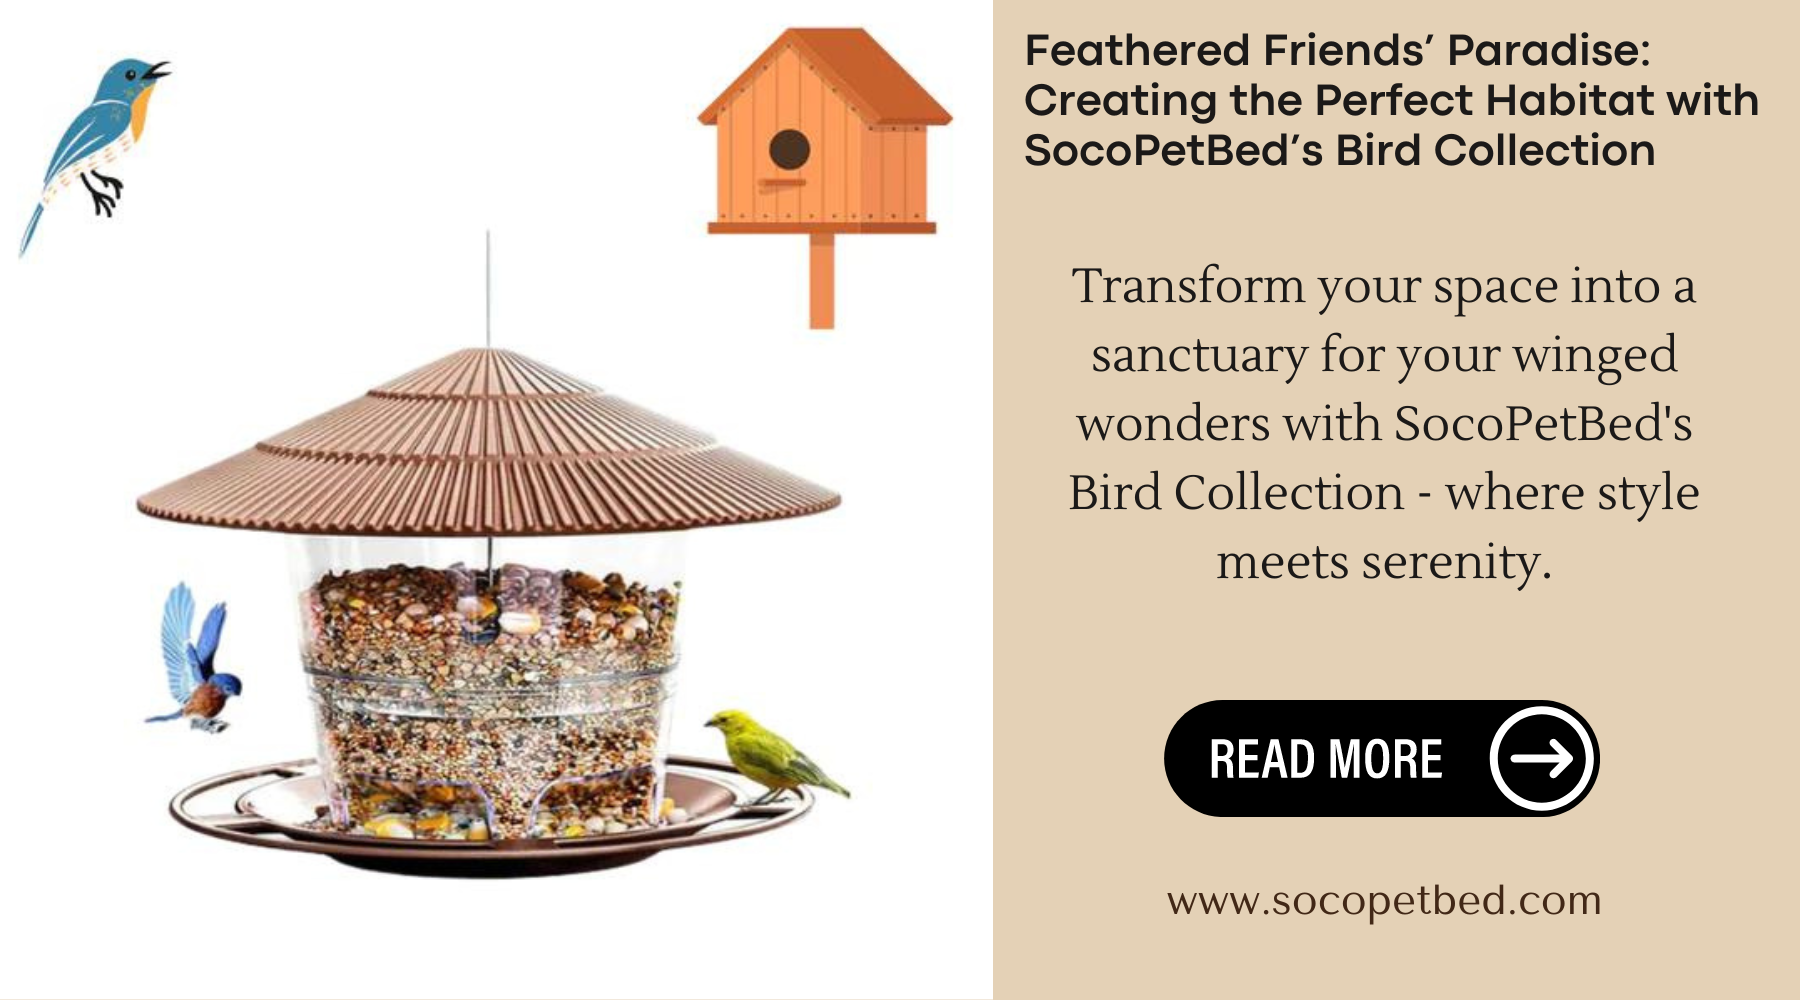 Feathered Friends’ Paradise: Creating the Perfect Habitat with SocoPetBed’s Bird Collection